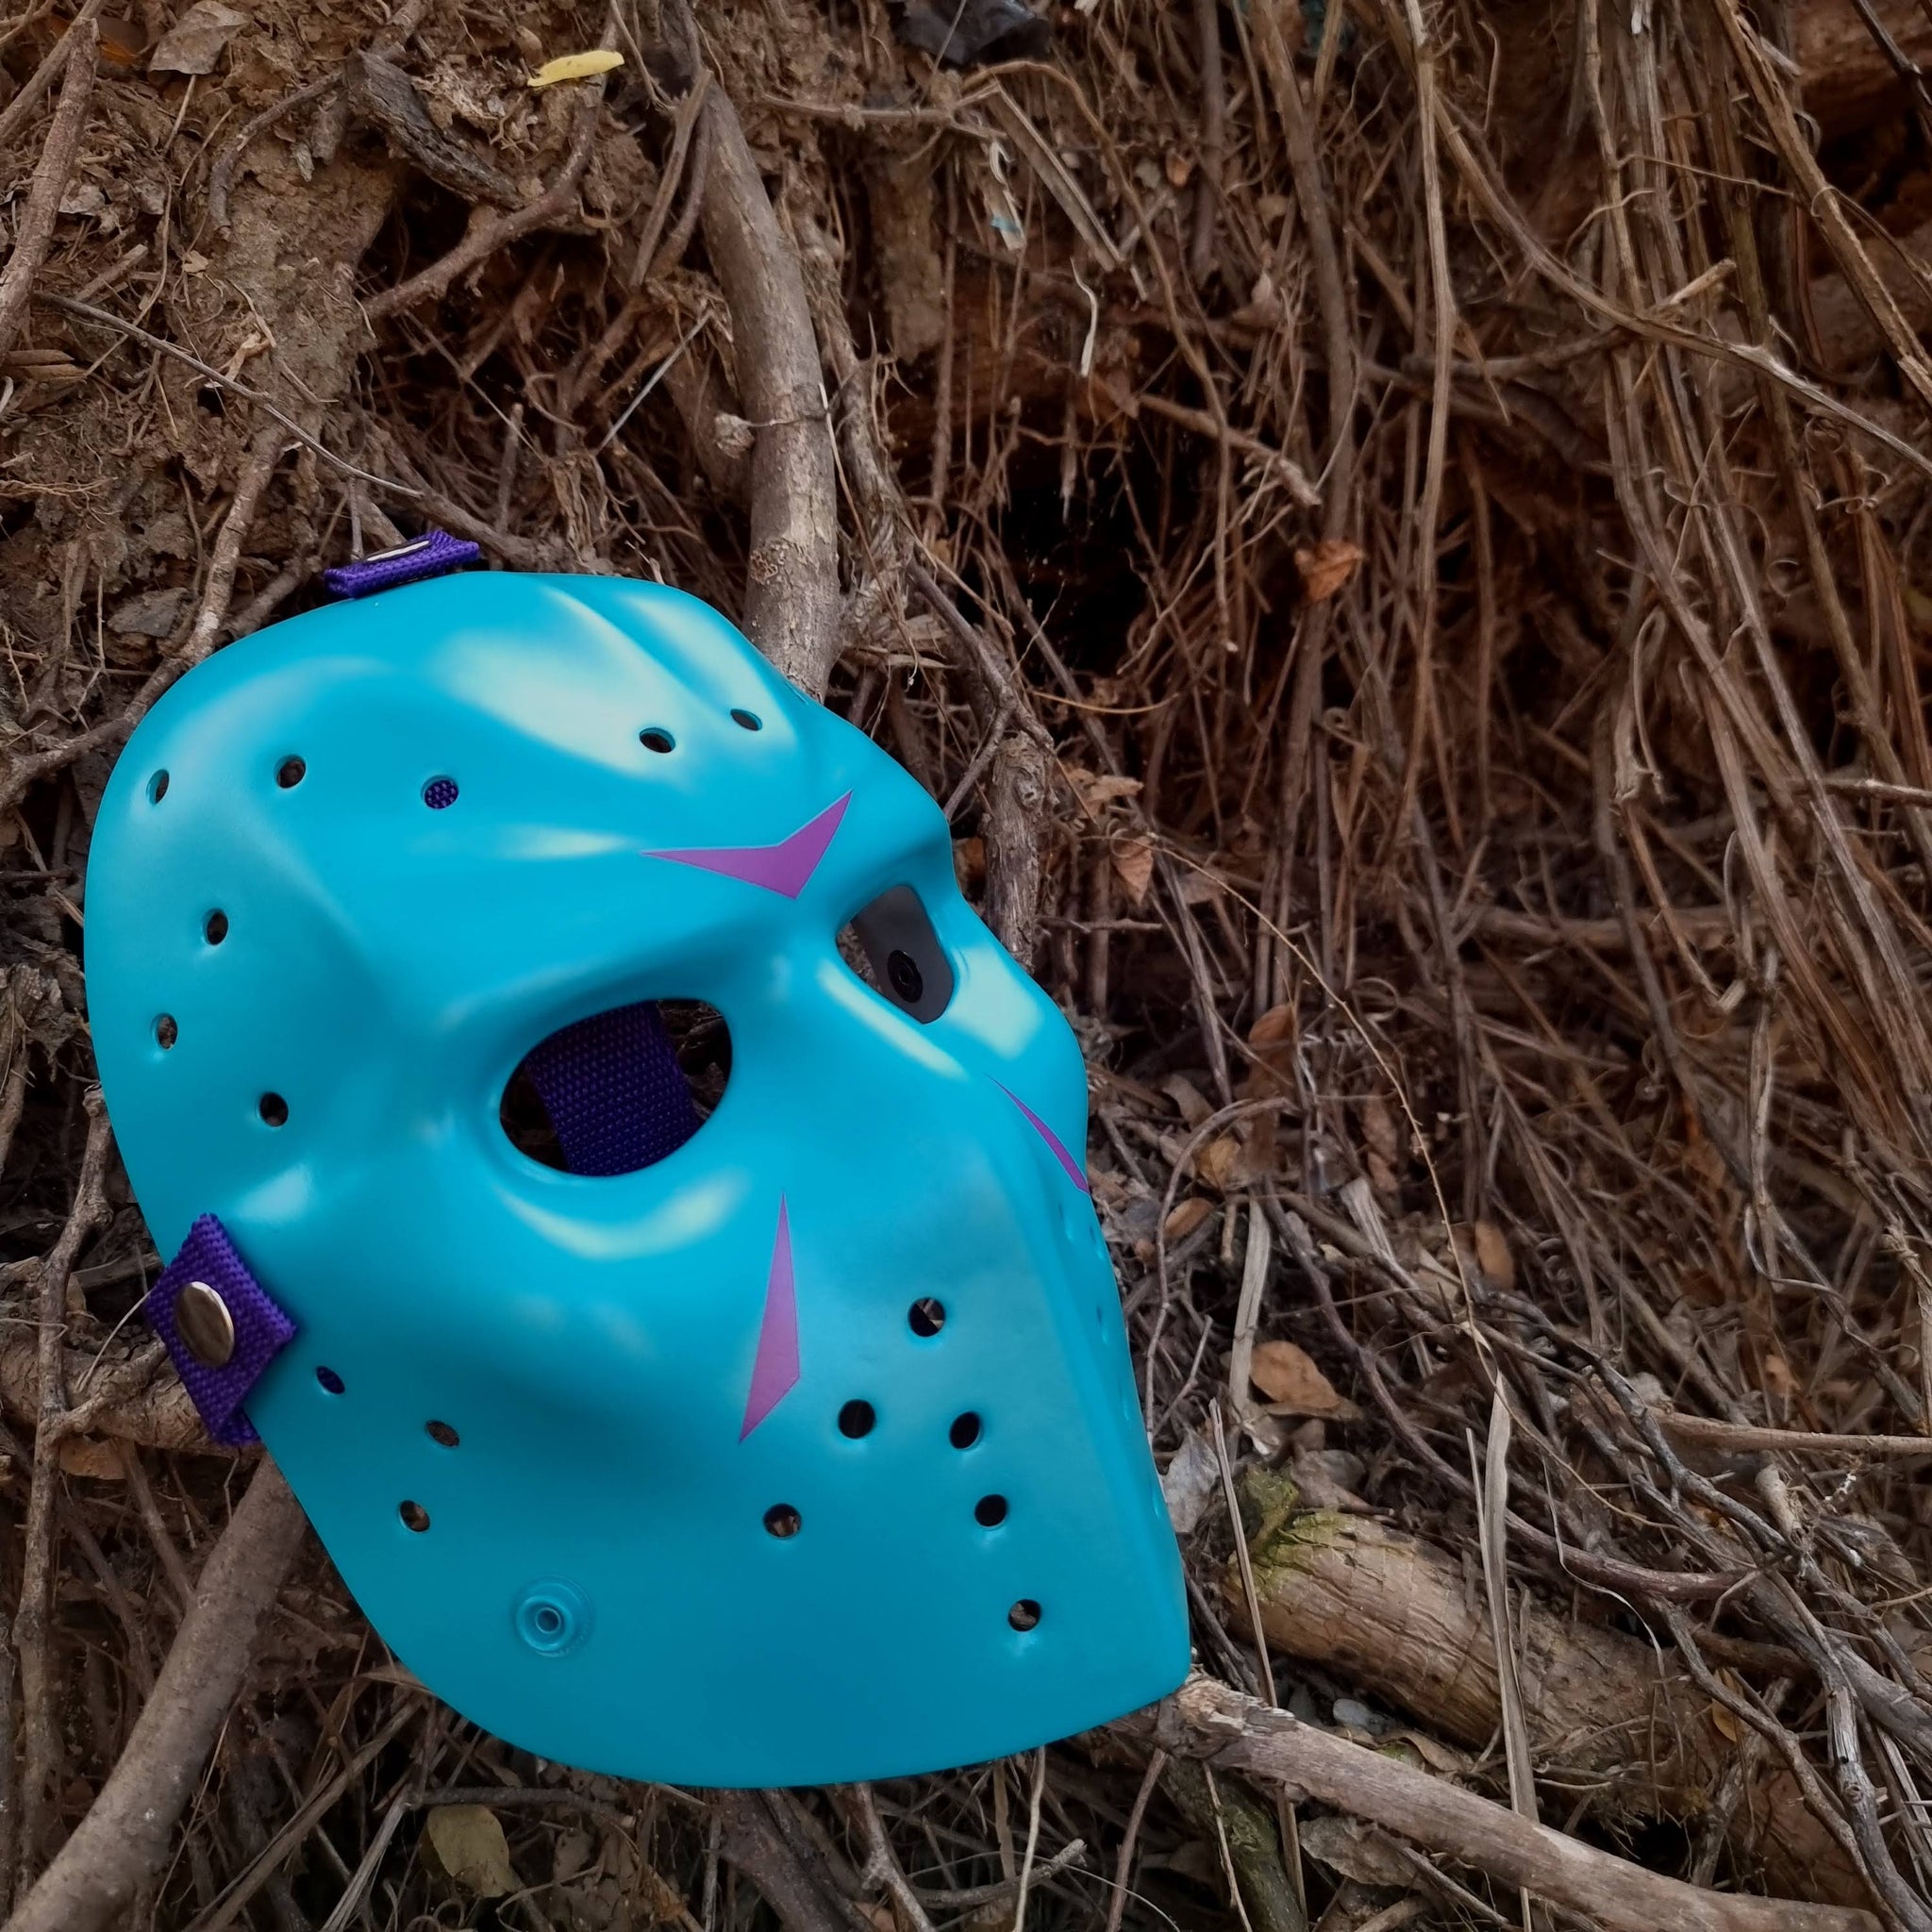 Mask Goalie Vintage Hockey Version Friday The 13th White Original Colecction Premium Quality Camp Crystal Lake